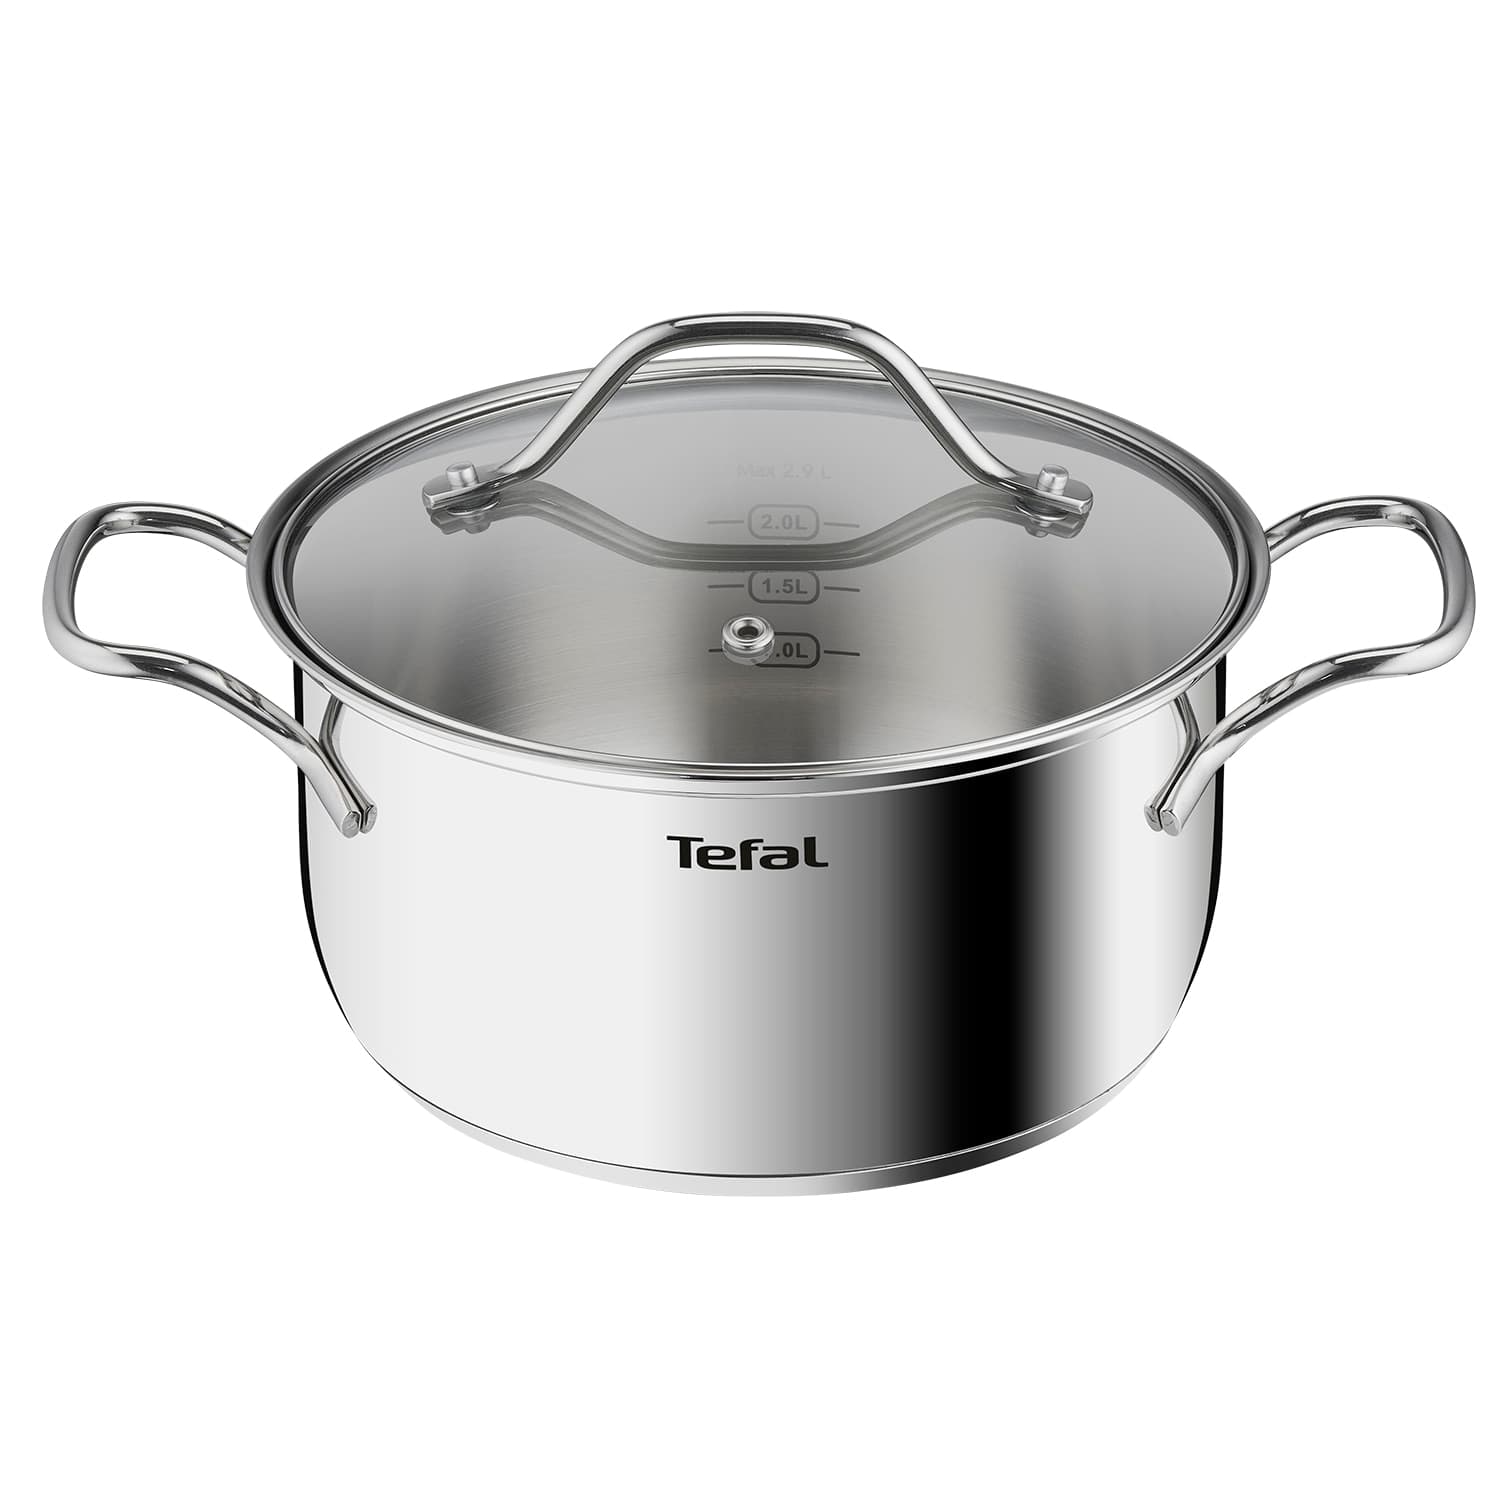 TEFAL Intuition stewpot 20 cm